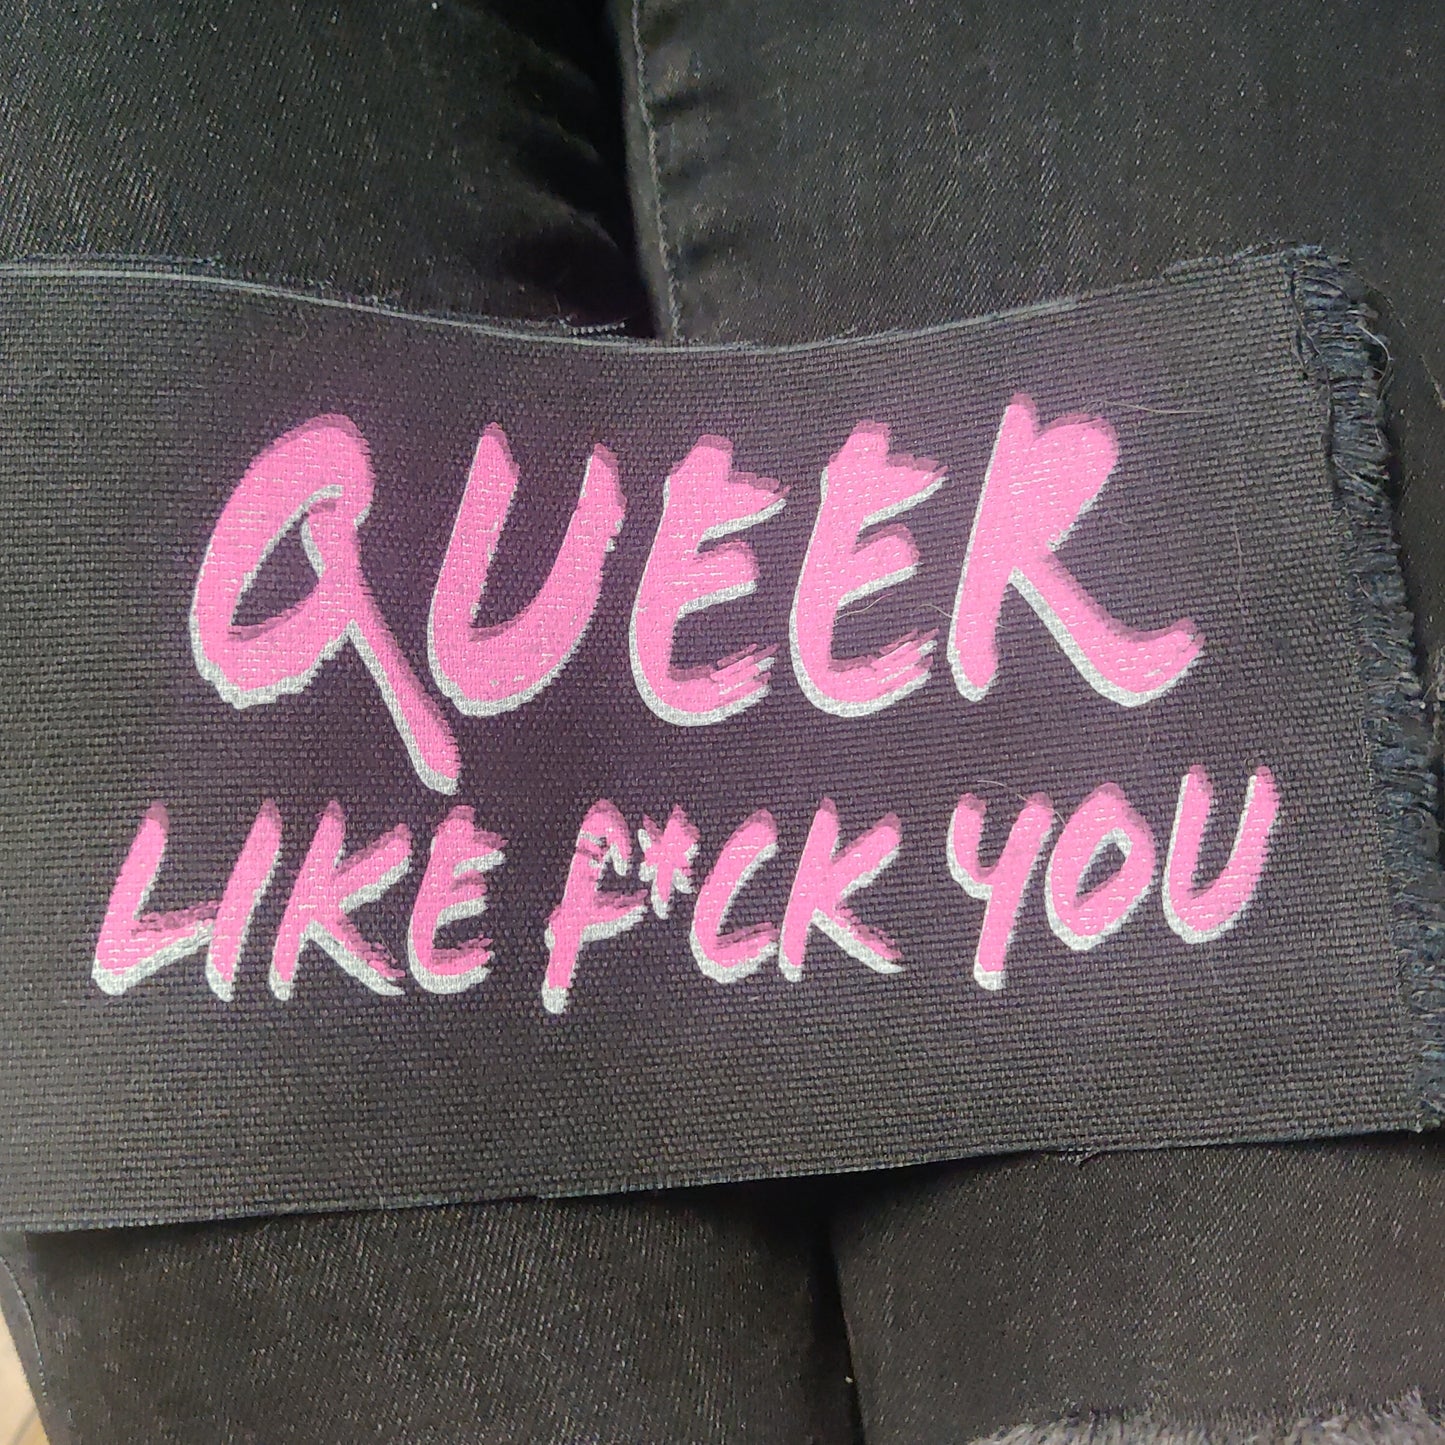 Queer Like F*ck You PATCH Bryan McKinney